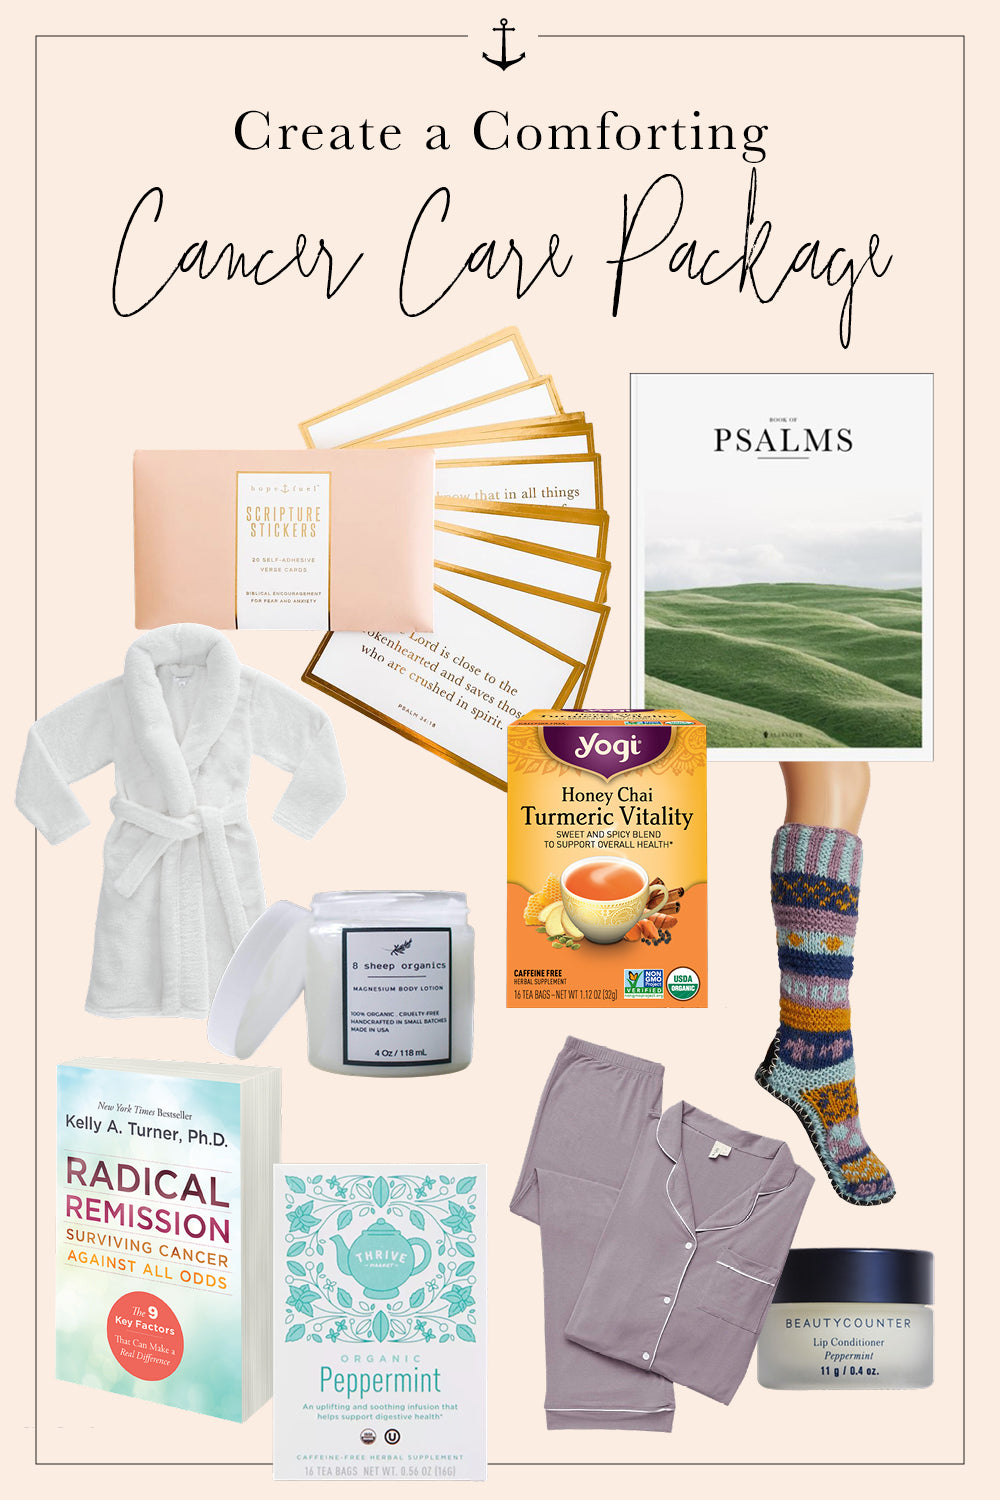 create a comforting cancer care package